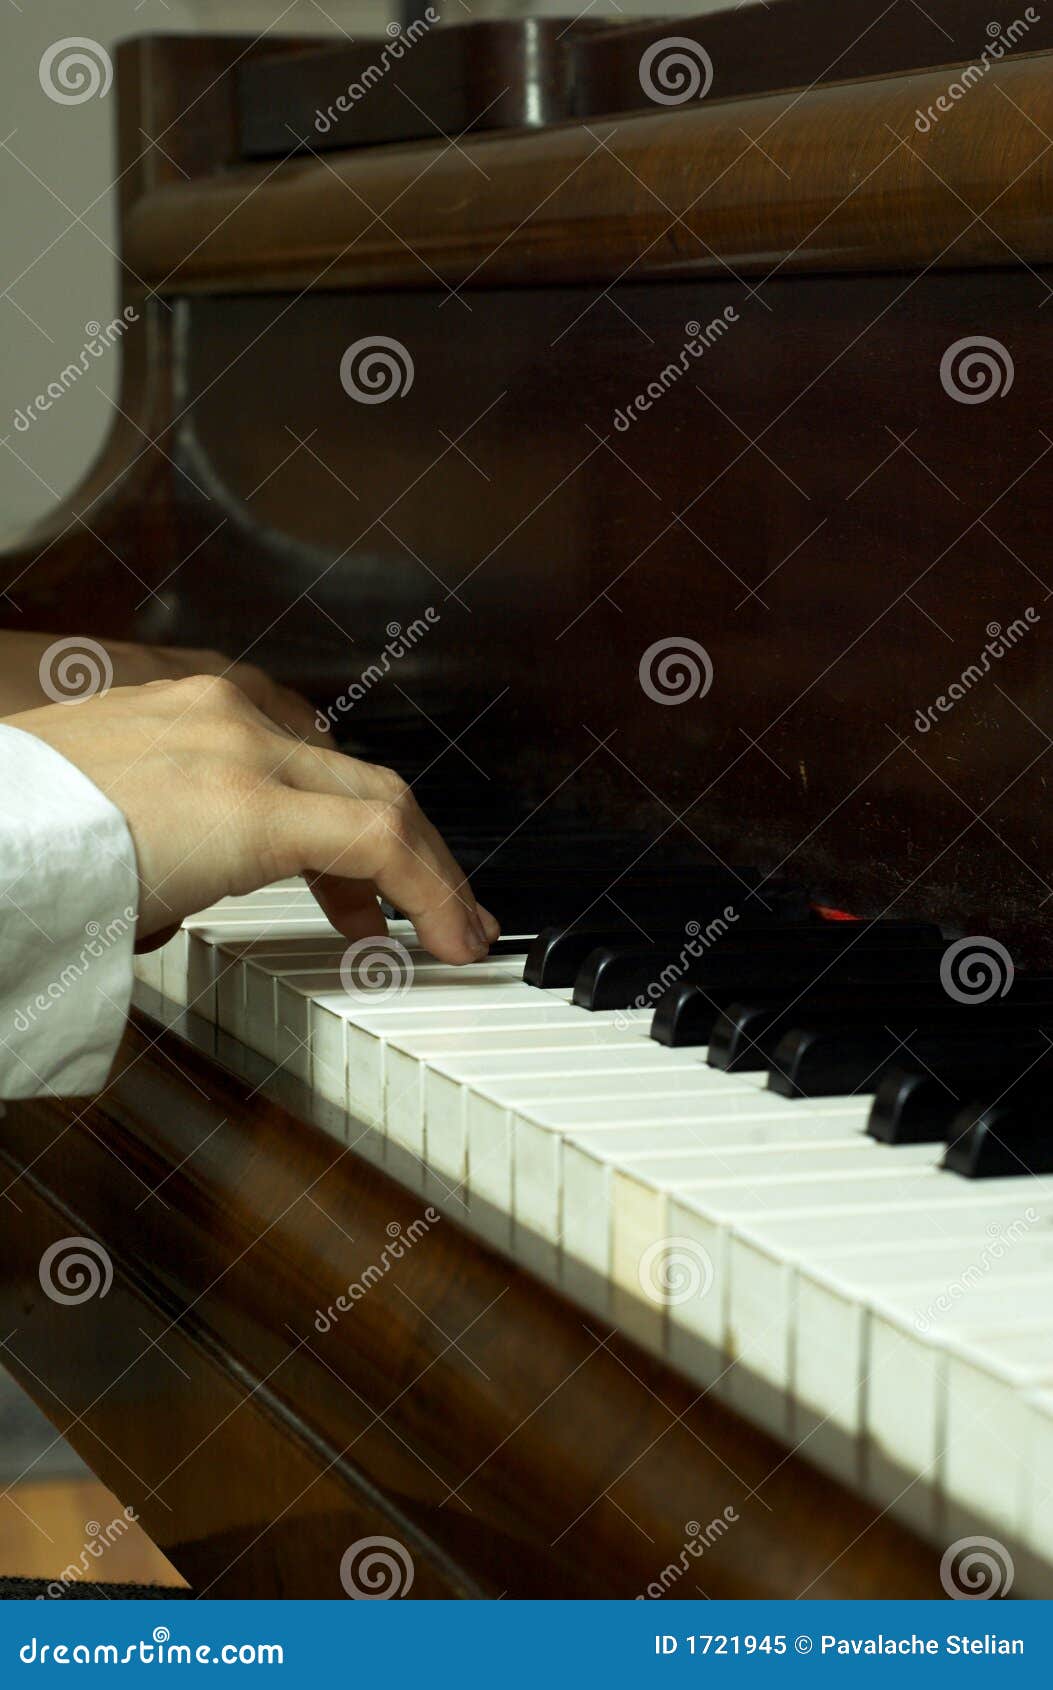 hands of a pianist at the piano